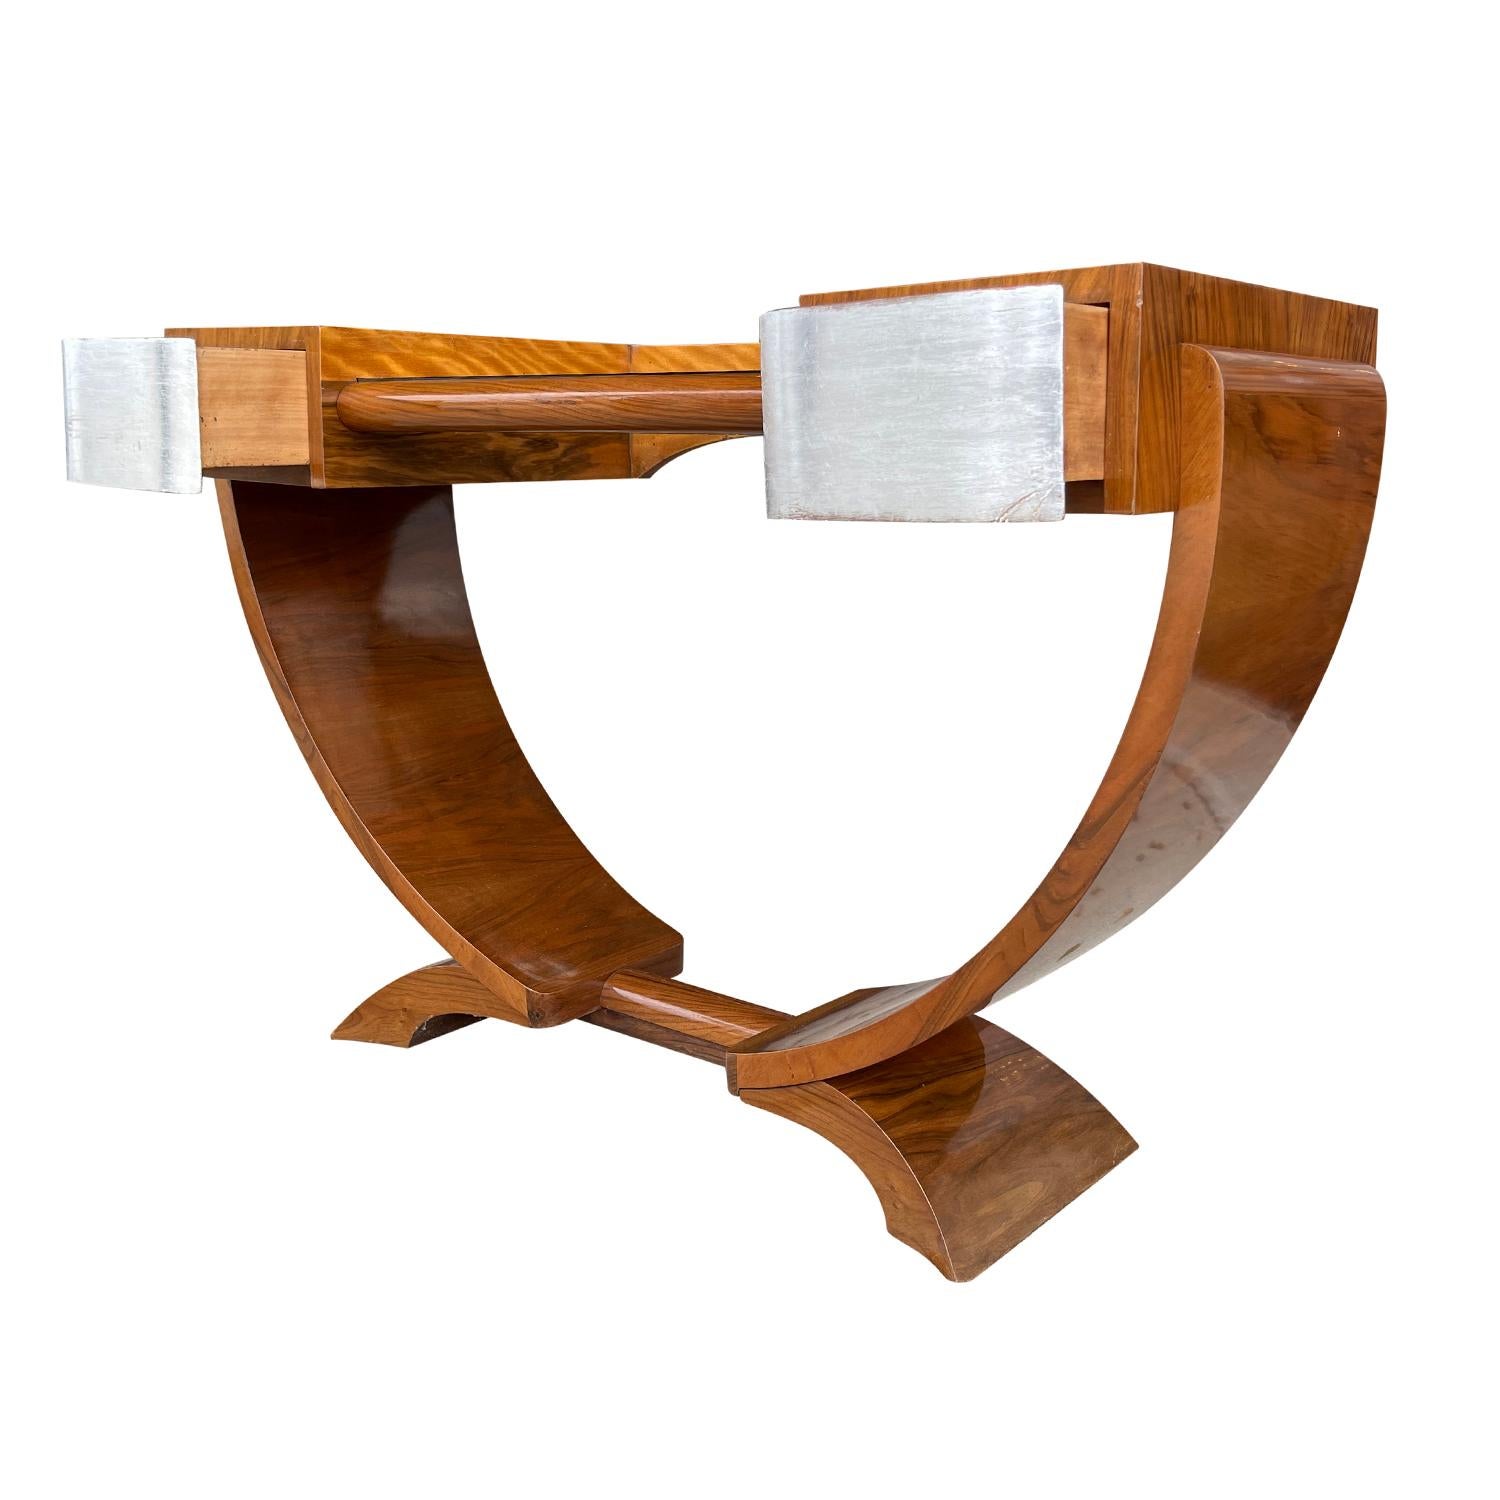 Veneer 20th Century French Art Deco Walnut Coiffeuse Vanity by Émile-Jacques Ruhlmann For Sale